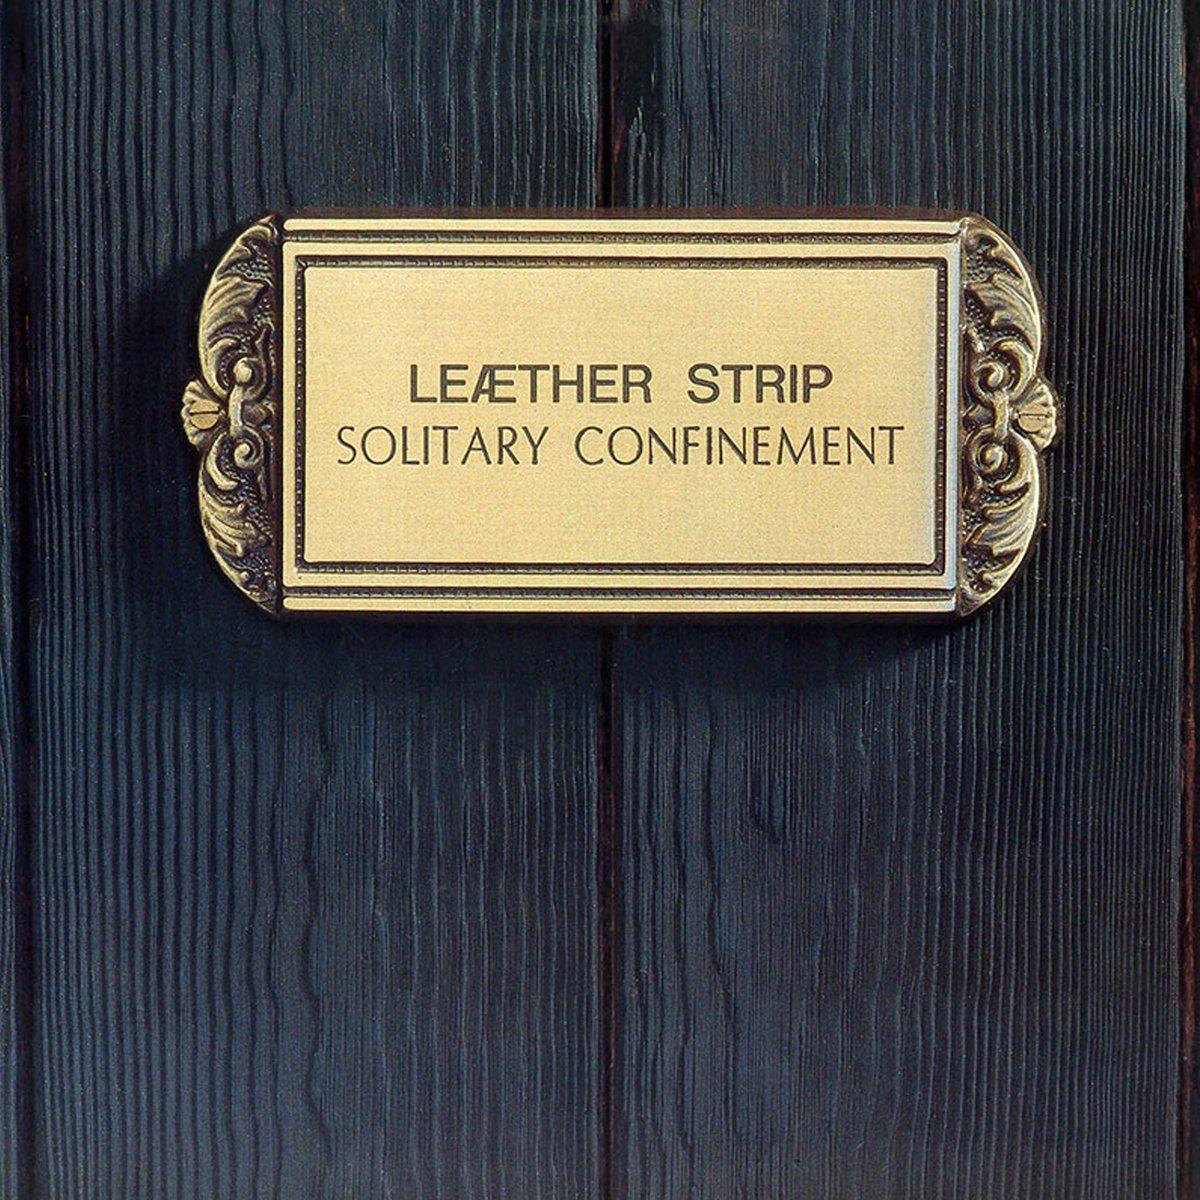 Appaloosa reccomend Mortal thoughts leather strip